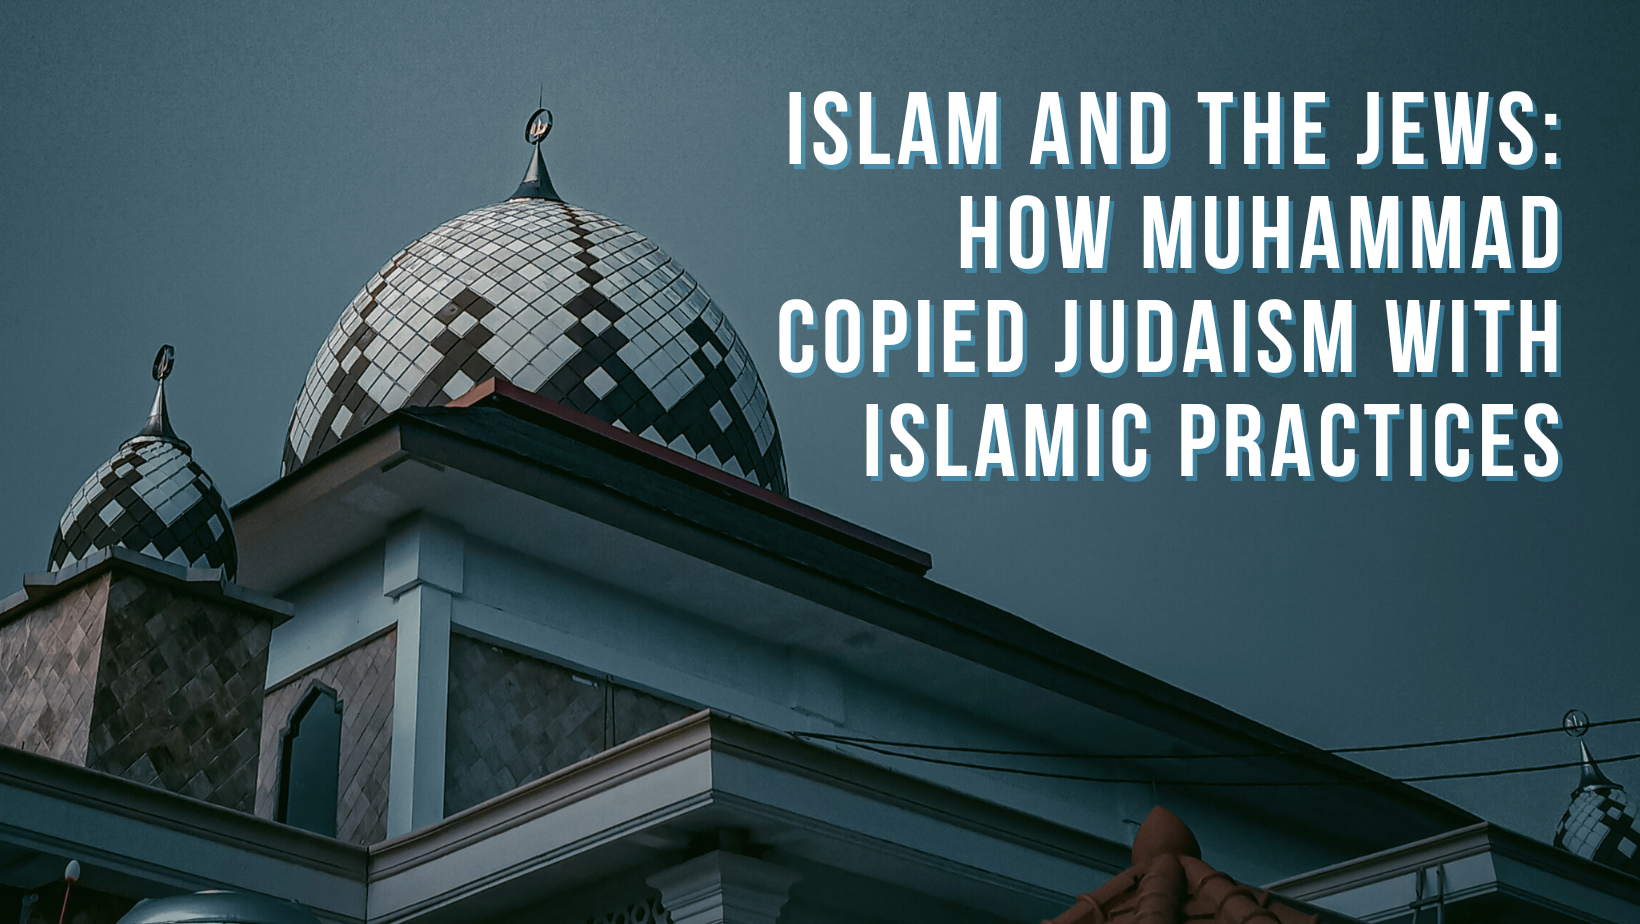 Islam and the Jews: How Muhammad copied Judaism with Islamic practices